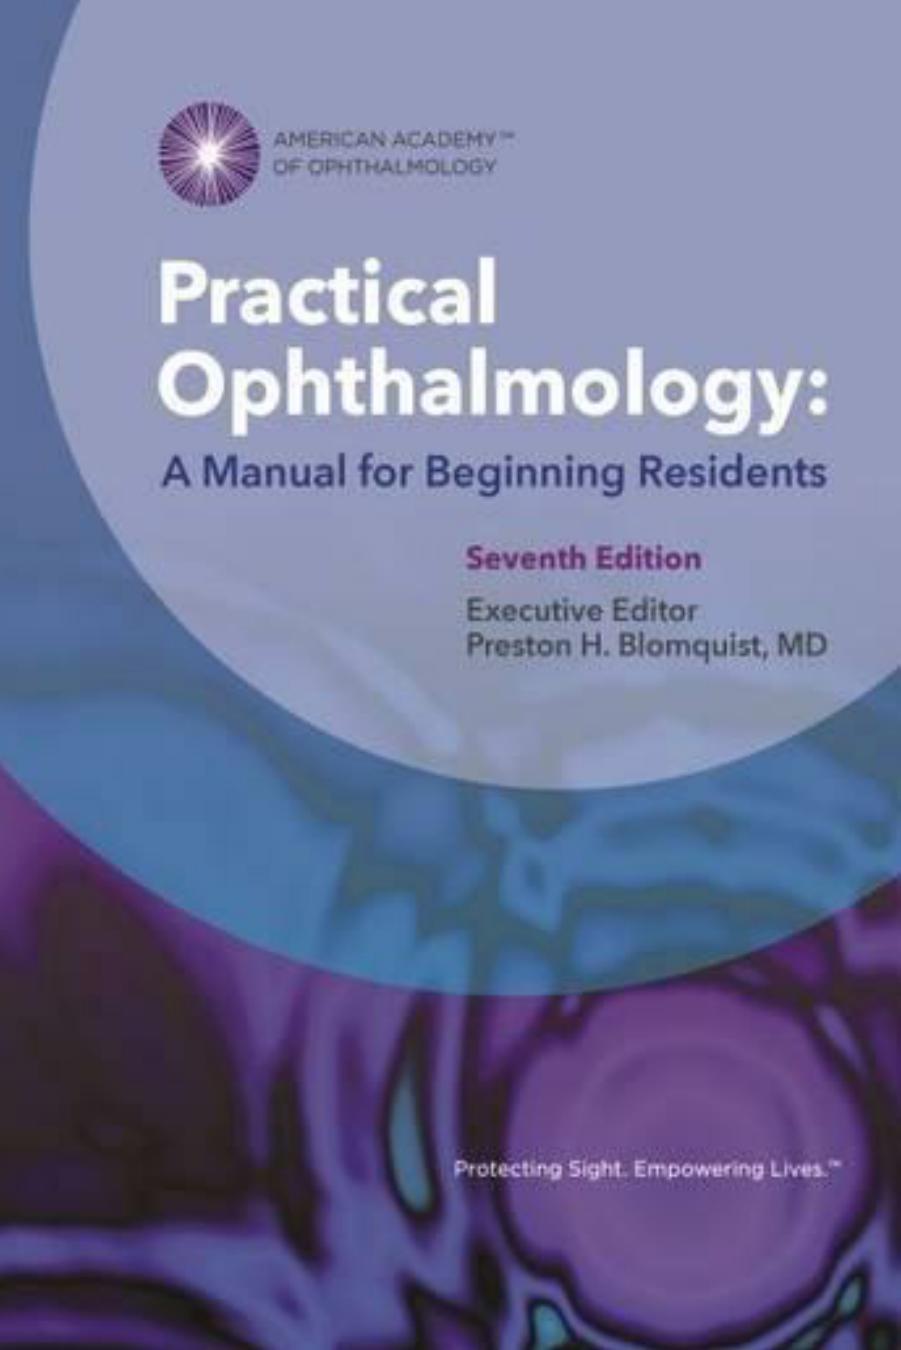 Practical Ophthalmology  A Manual for Beginning Residents 7th ed 2015